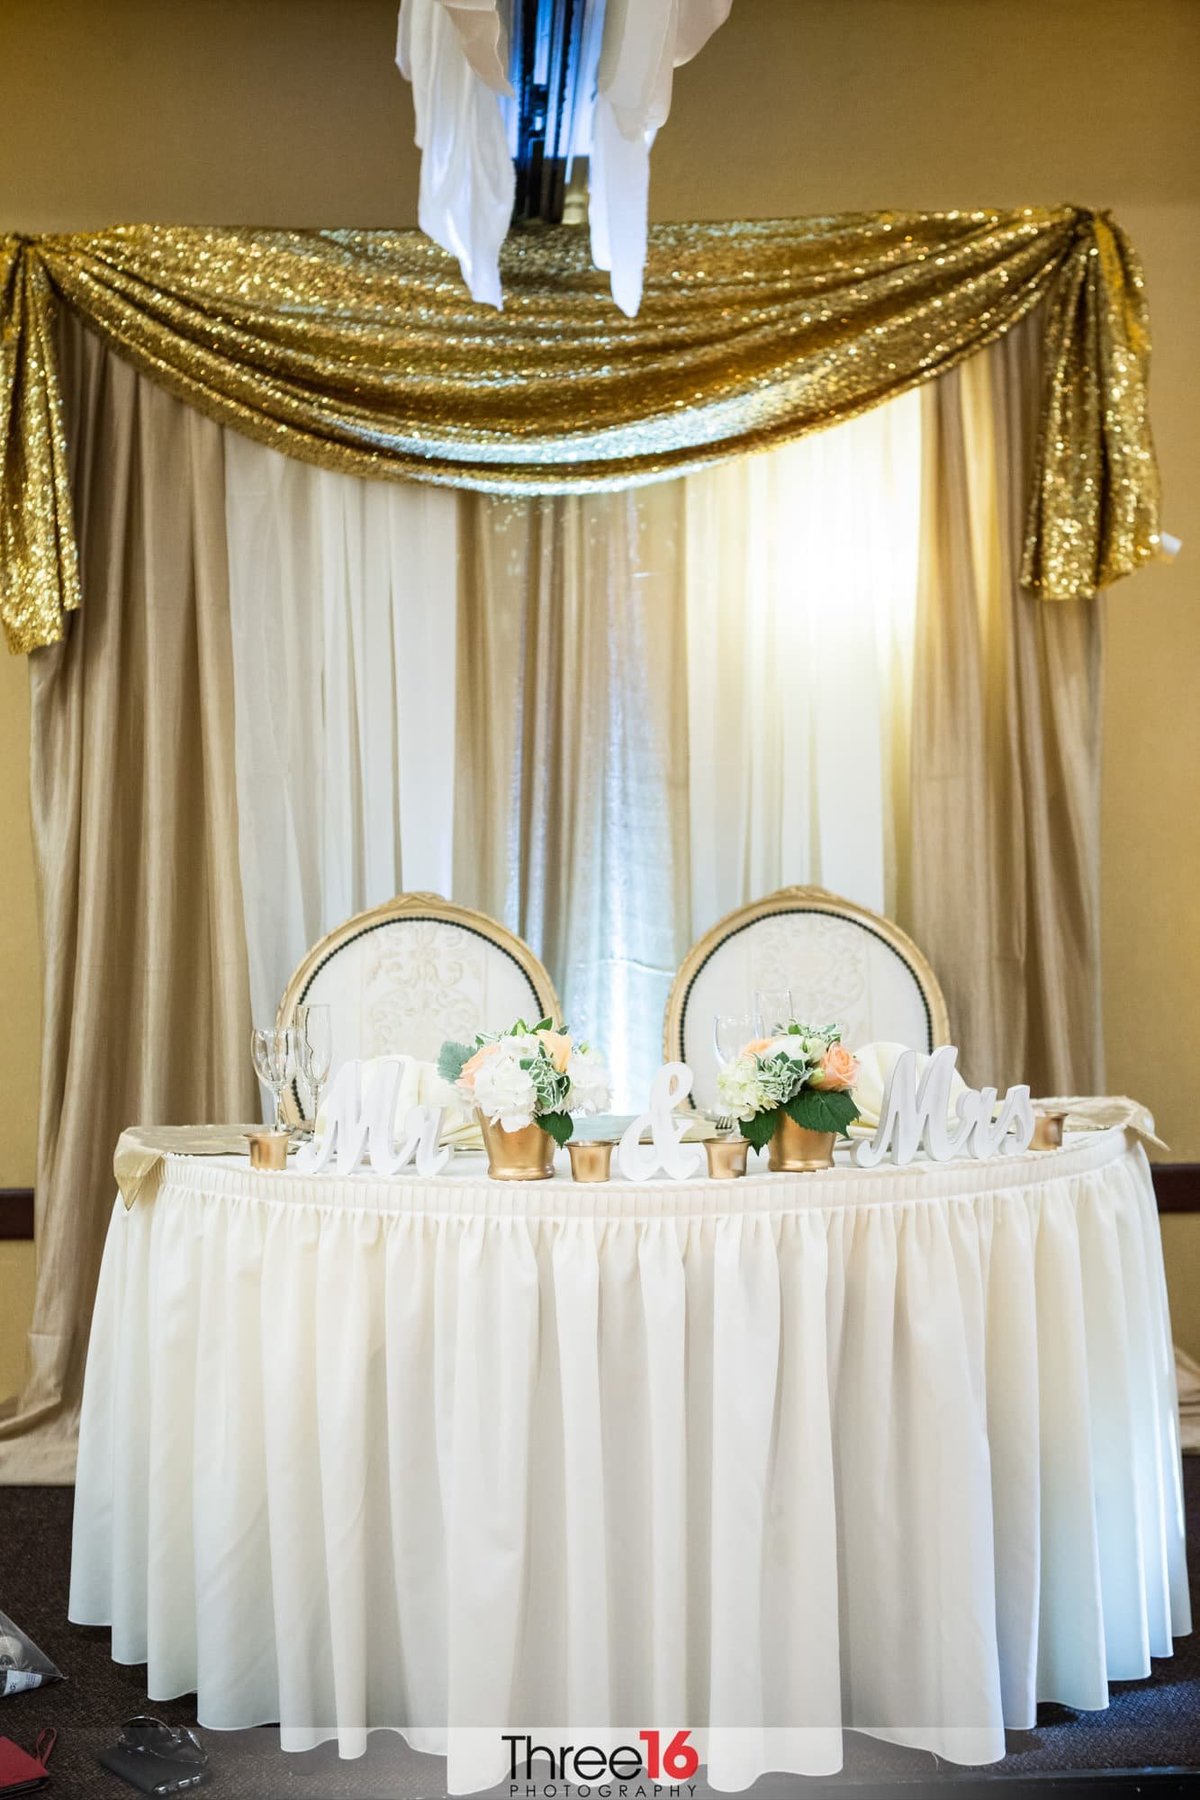 Sweetheart Table at the Hotel Fullerton Wedding Venue